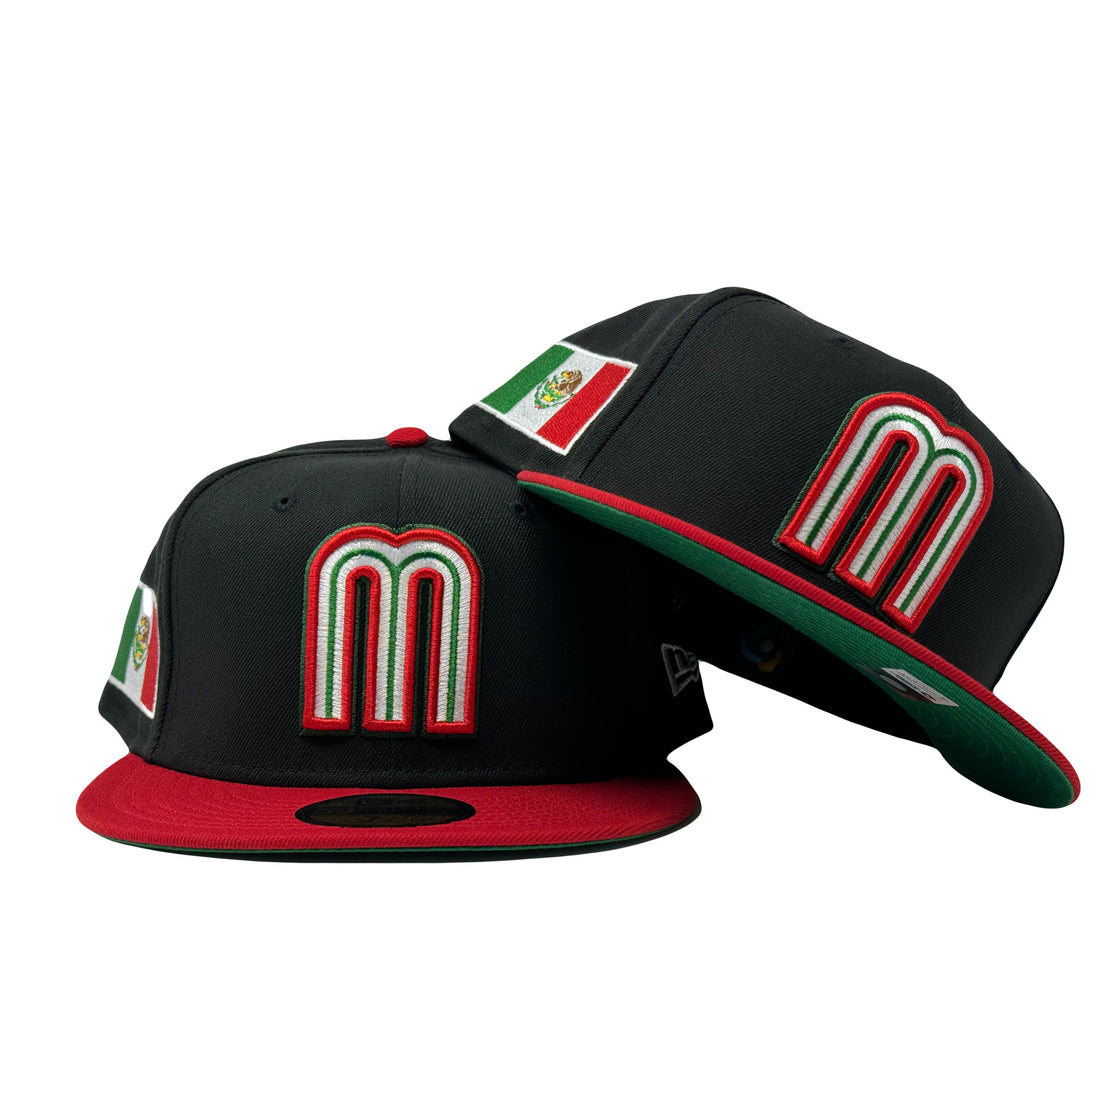 Mexico World Baseball Classic Black Red Visor 5950 New Era Fitted Hat